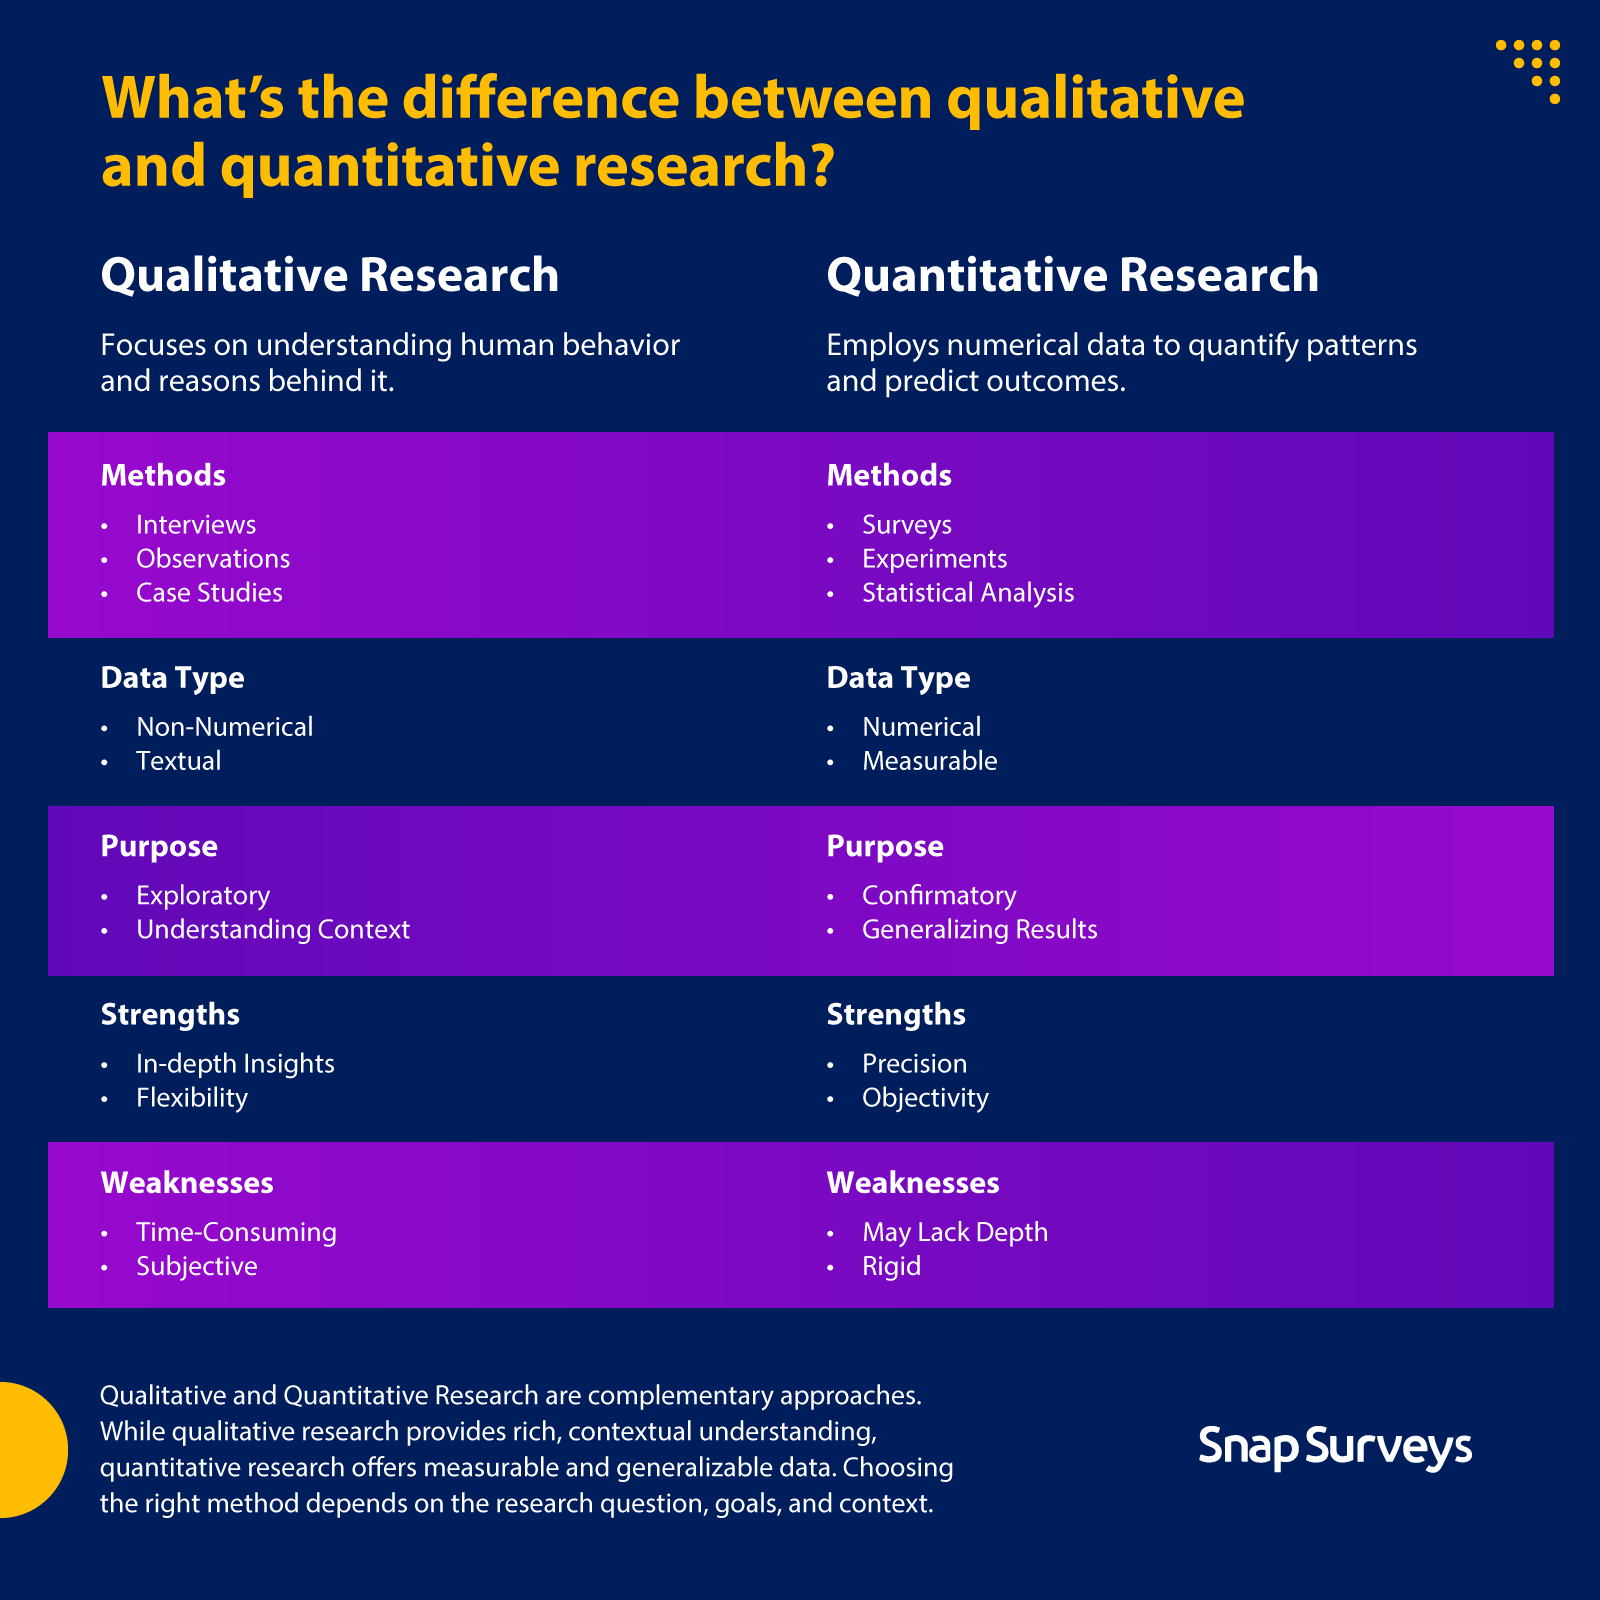 Difference between qualitative and quantitative research.